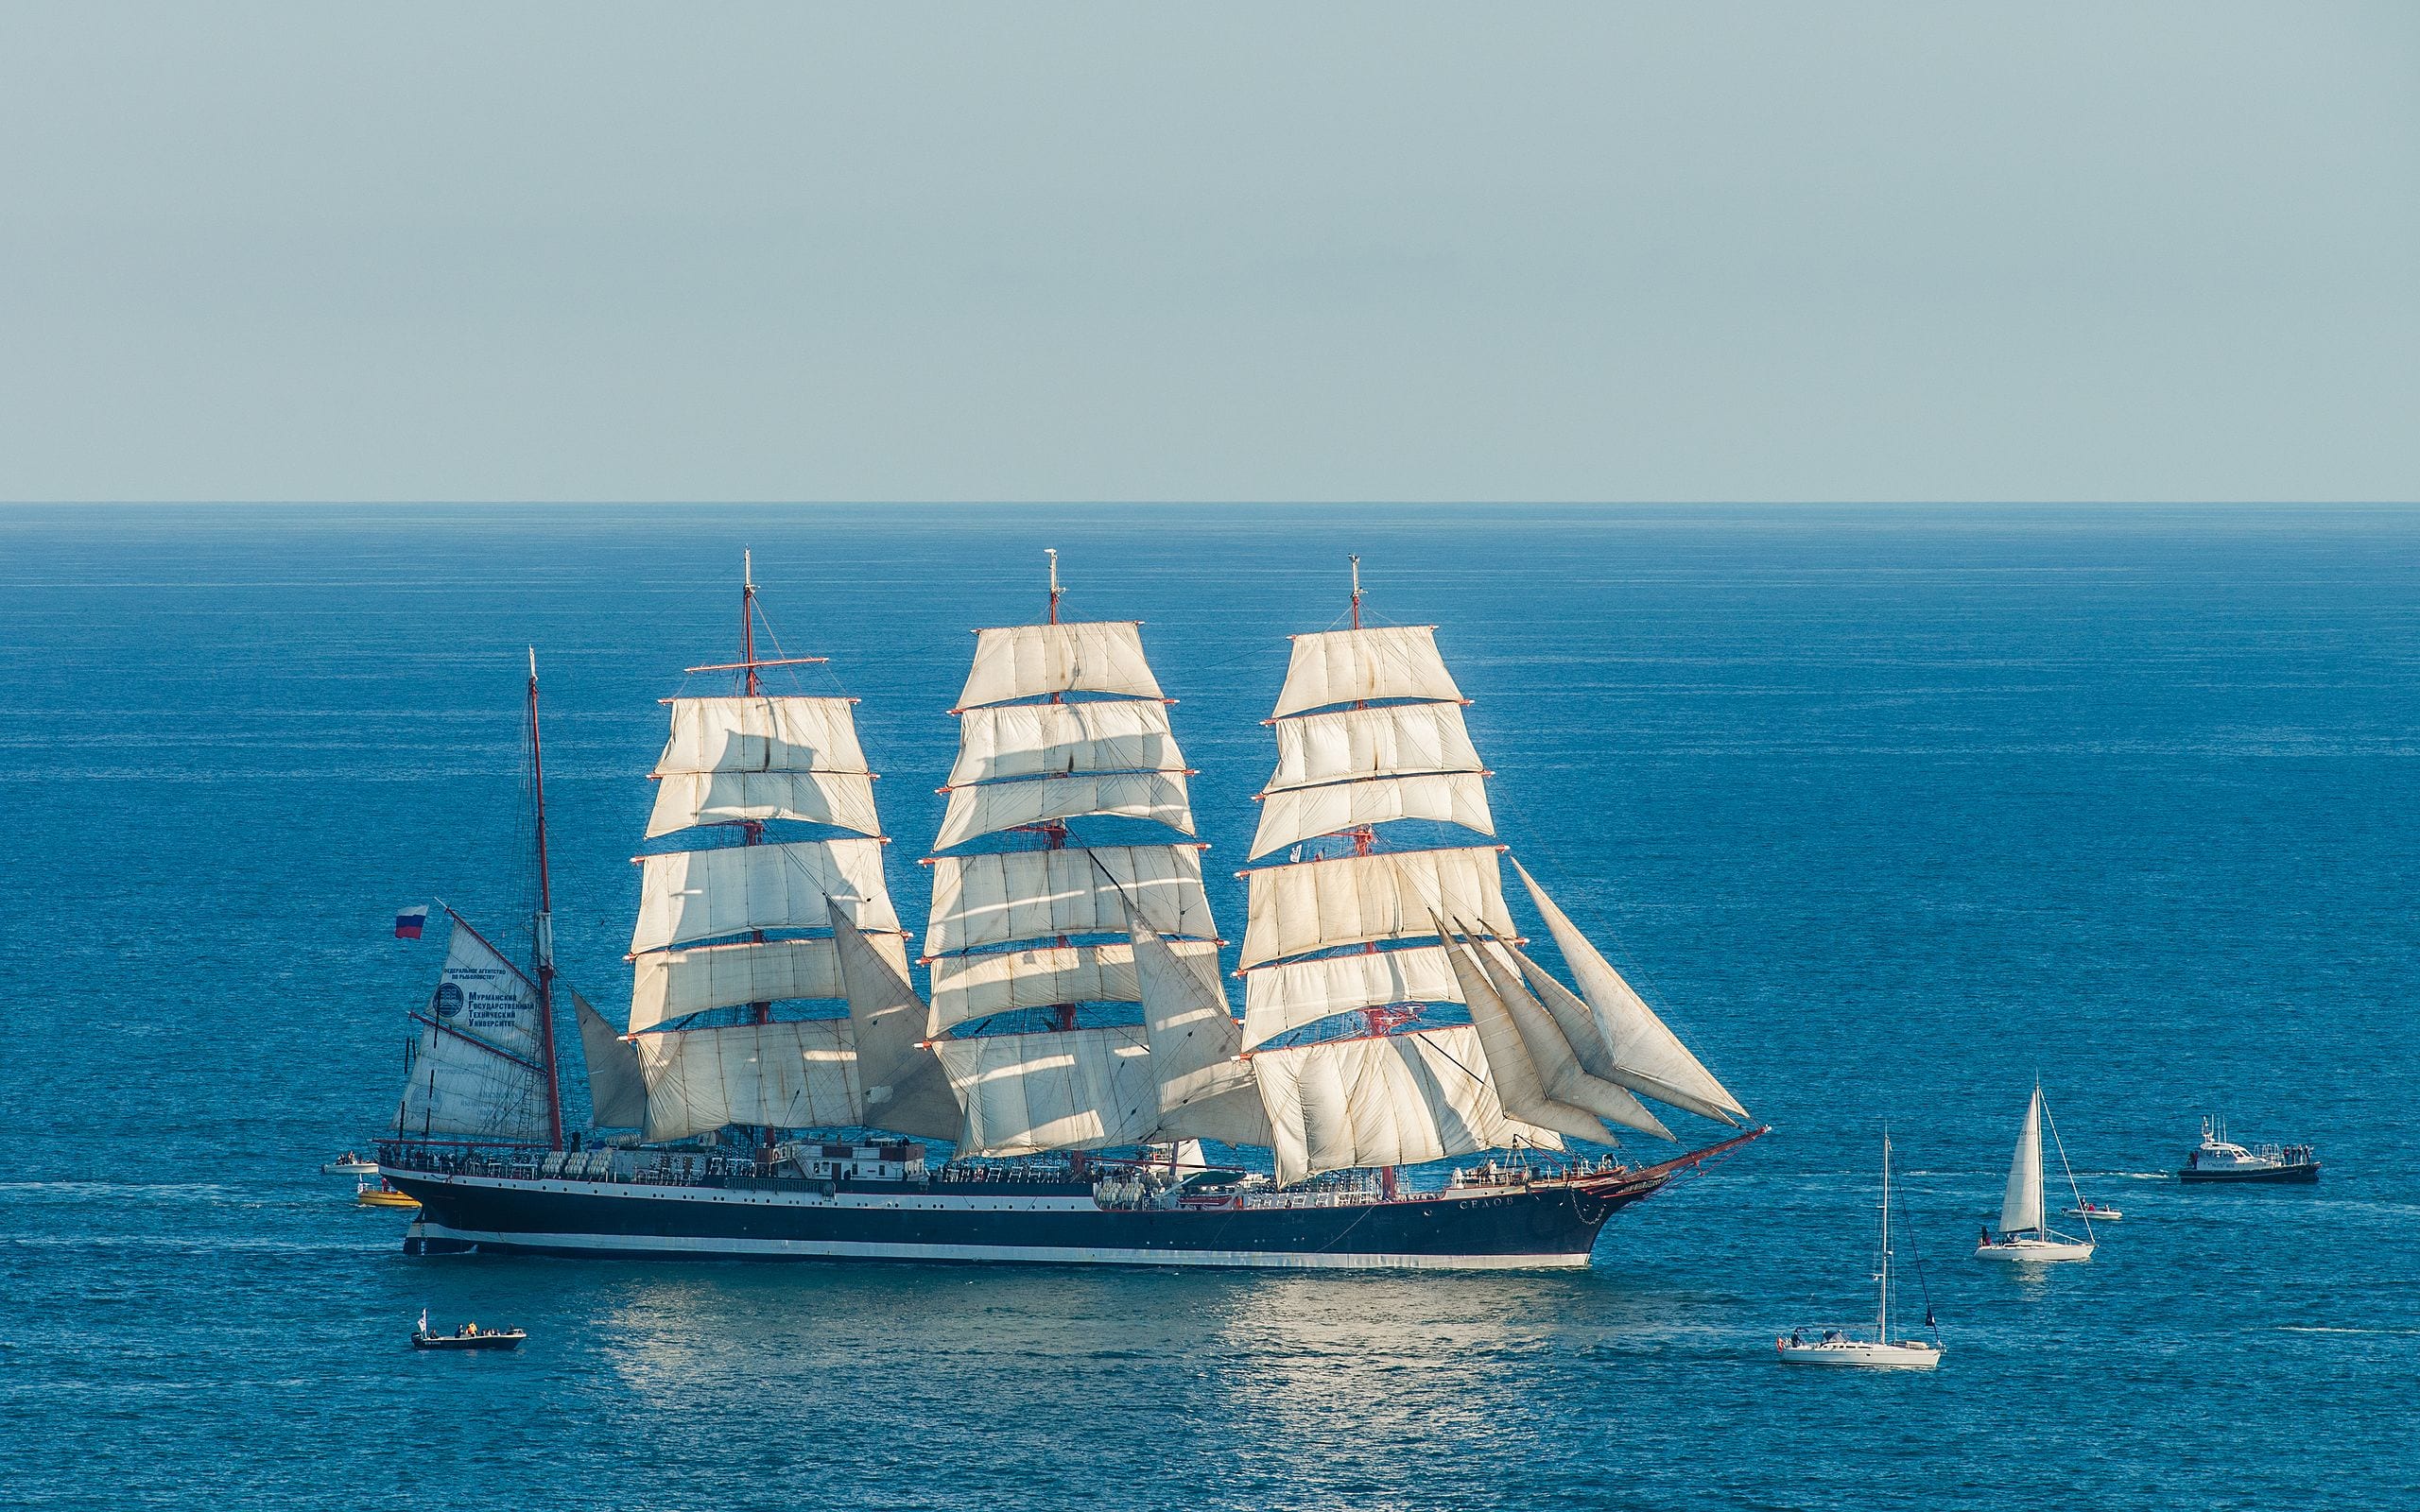 Russian Tall Ship Completes Historic Northern Sea Route Passage